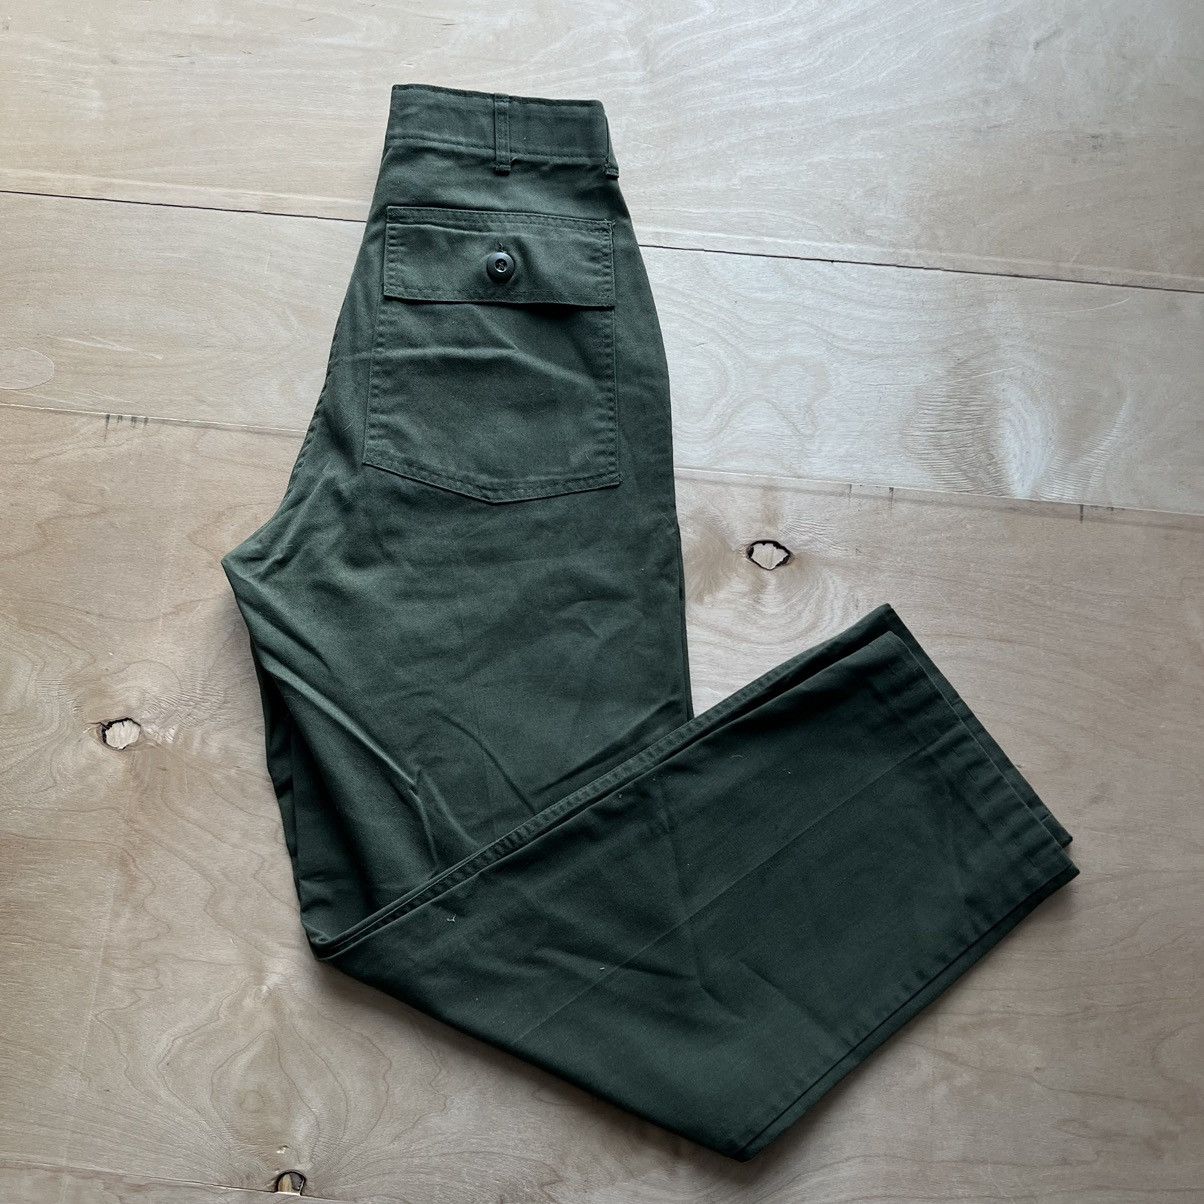 Vintage Vintage Military OG 507 Pants 26x28.5 Green Army Workwear Size US 26 / EU 42 - 11 Preview